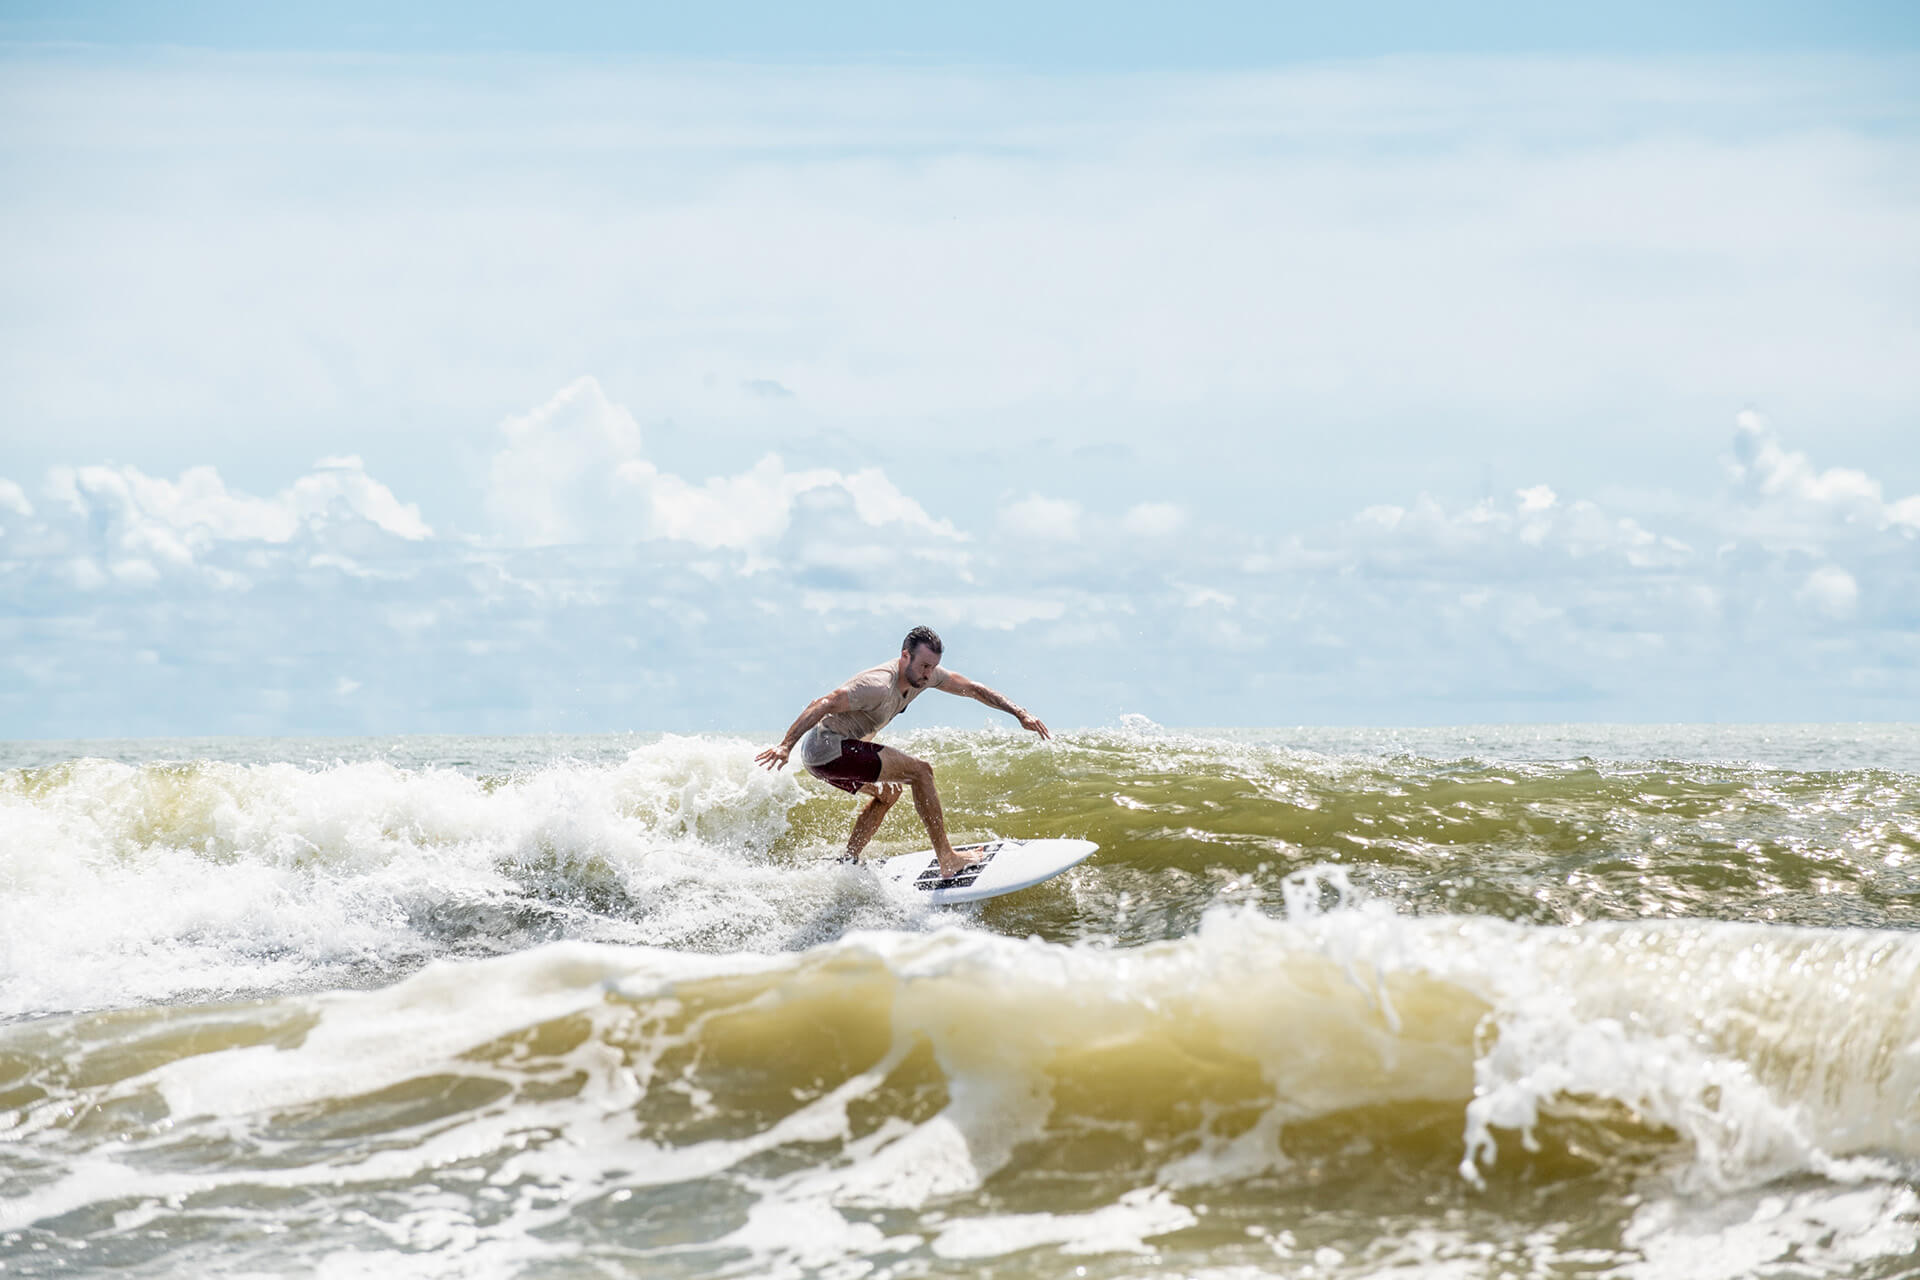 Catching waves and keeping connected: Warrior Surf Foundation & Dejero